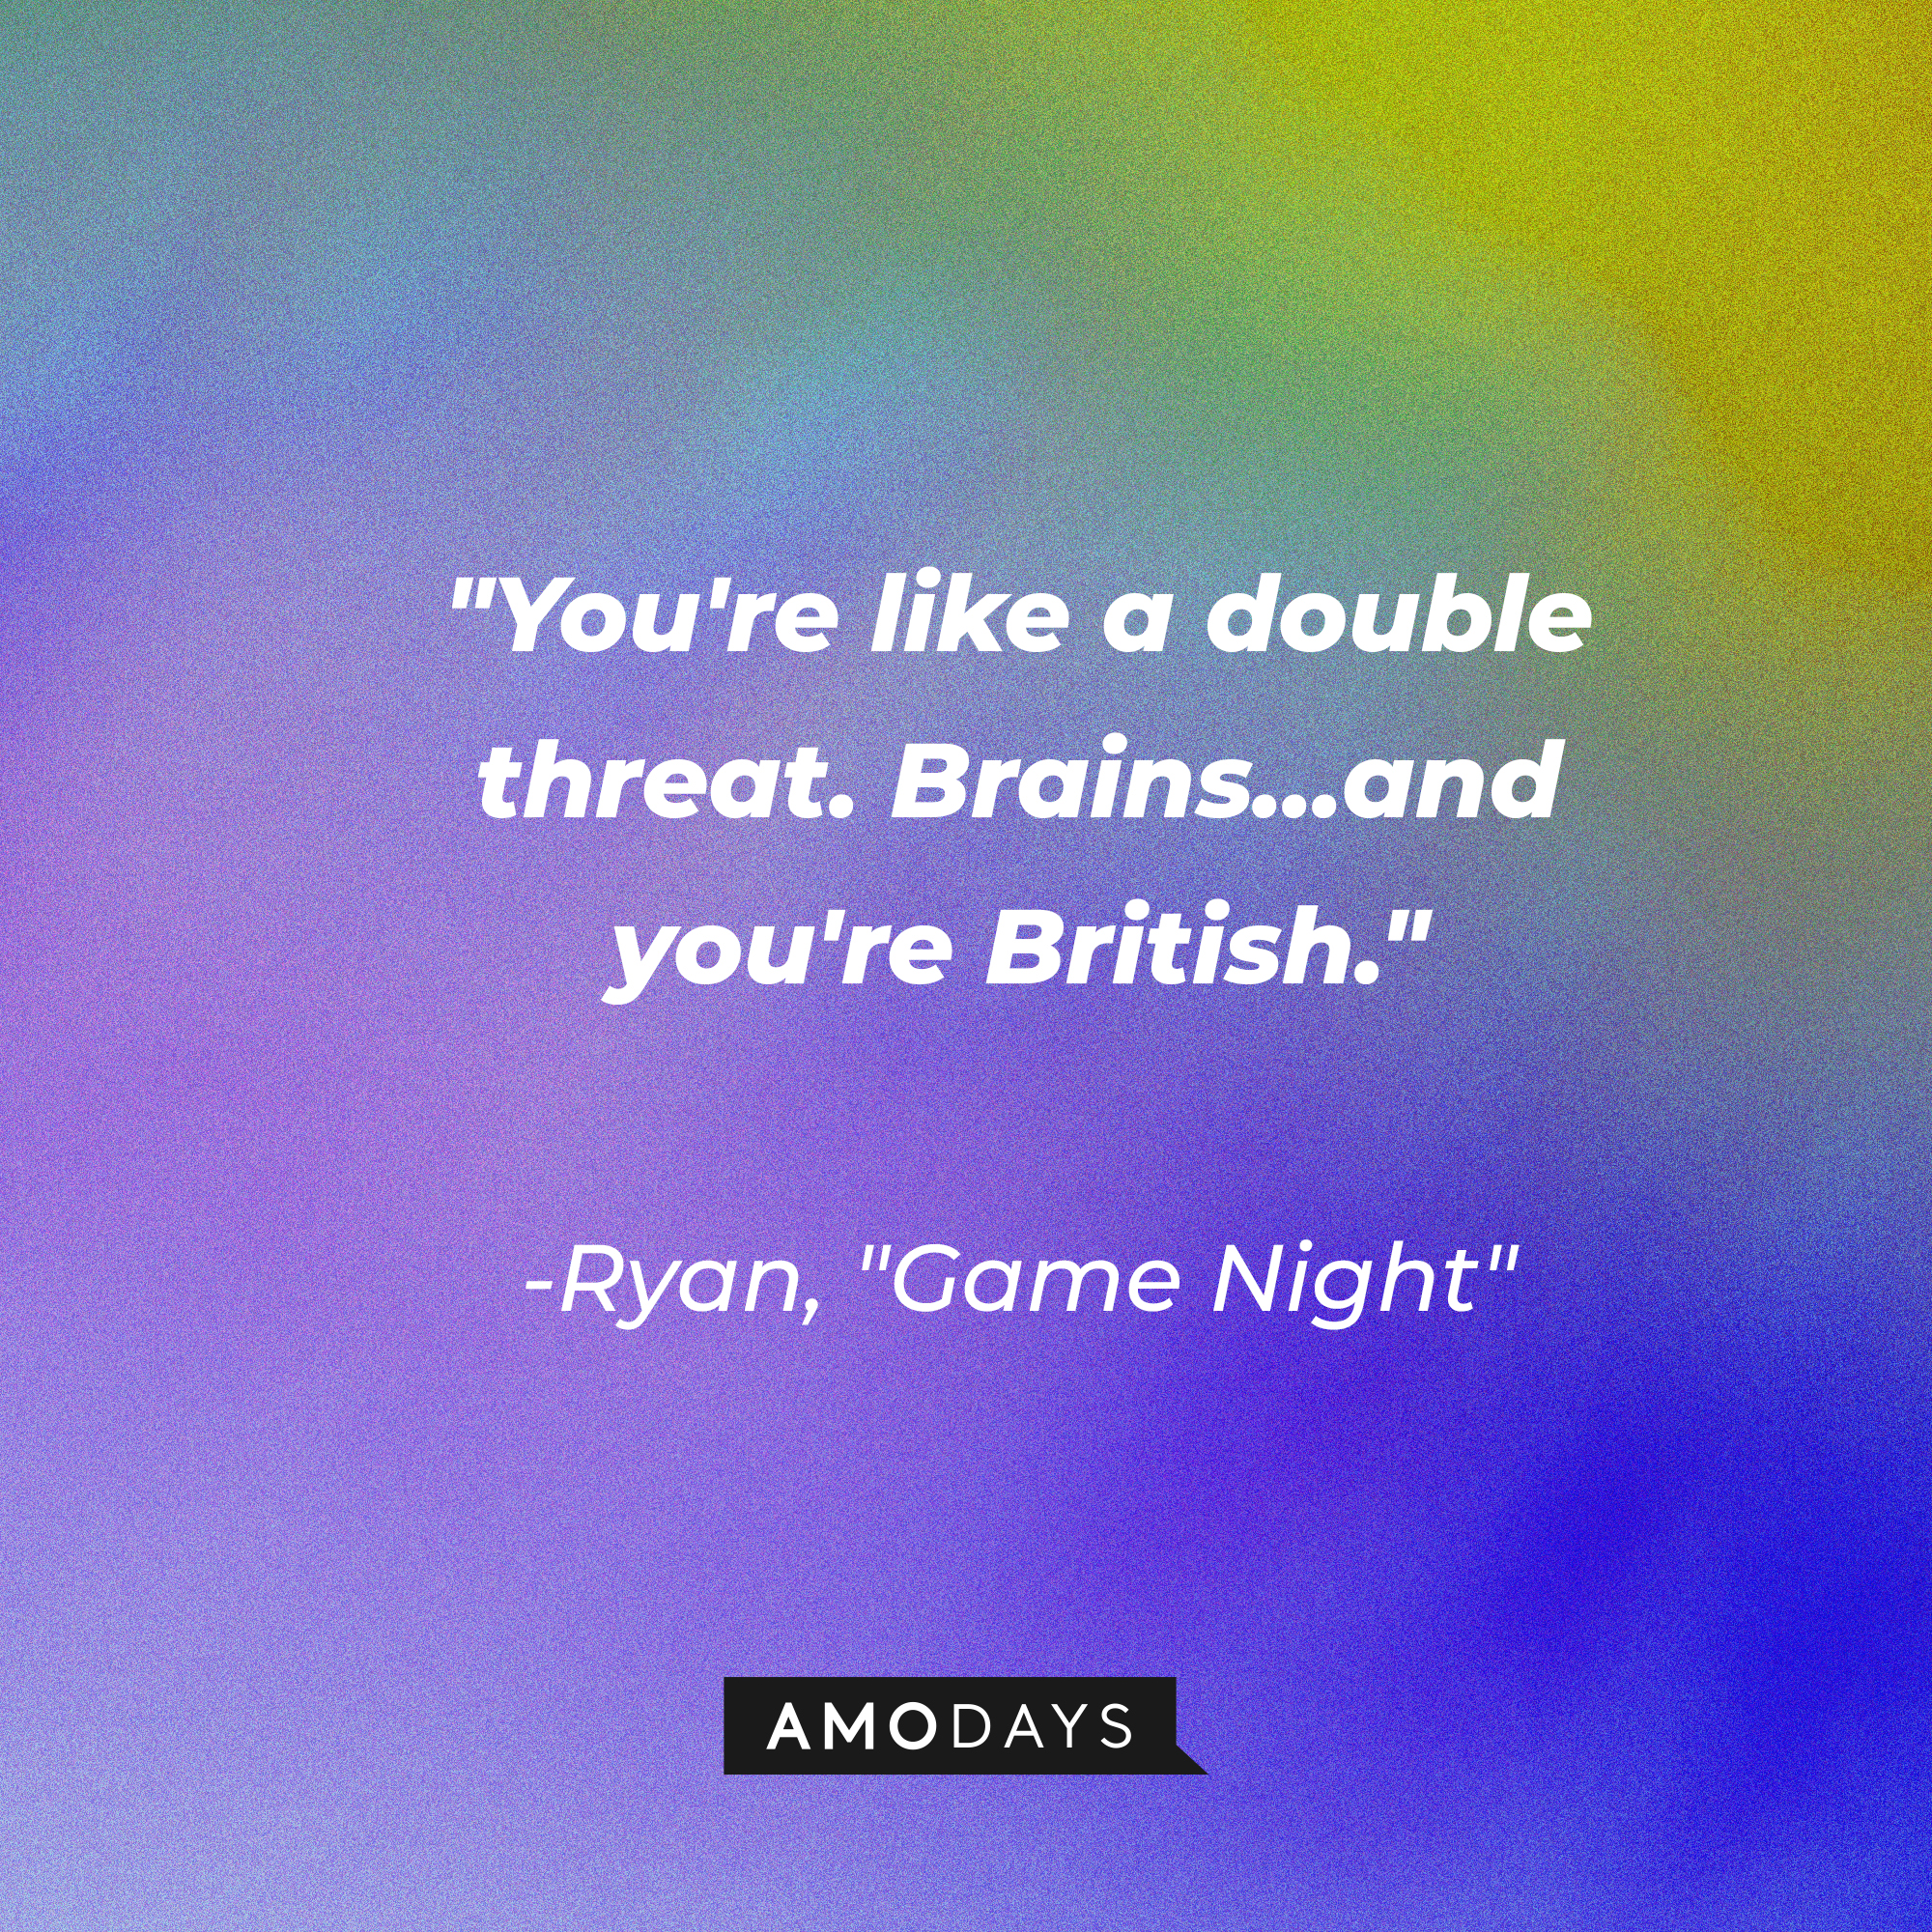 Ryan's quote from “Game Night”: “You're like a double threat. Brains... and you're British.” | Source: AmoDays